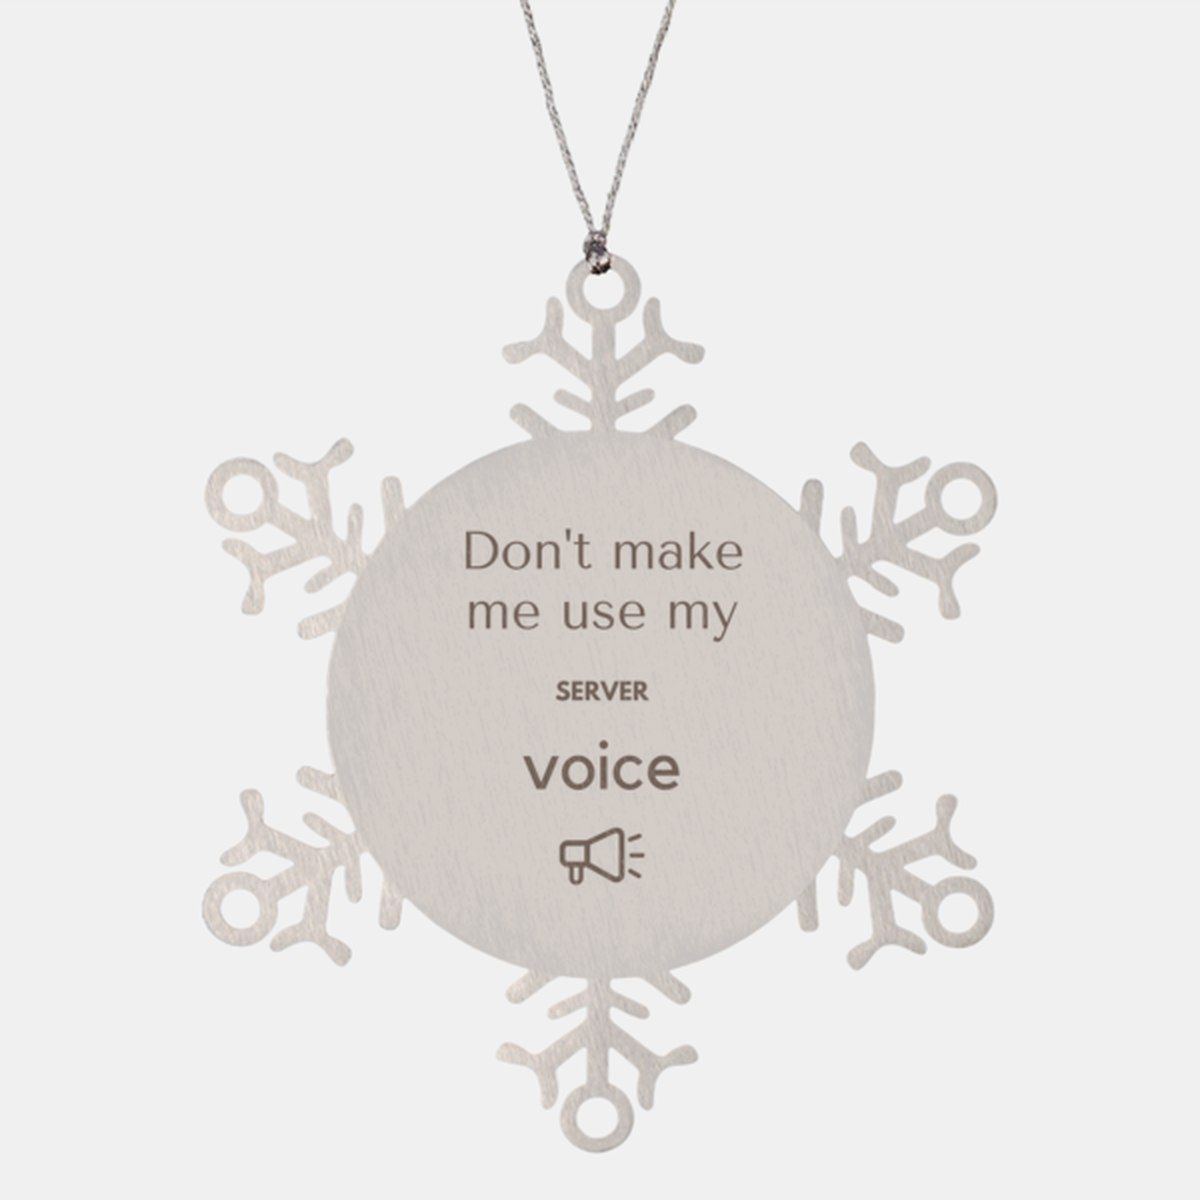 Don't make me use my Server voice, Sarcasm Server Ornament Gifts, Christmas Server Snowflake Ornament Unique Gifts For Server Coworkers, Men, Women, Colleague, Friends